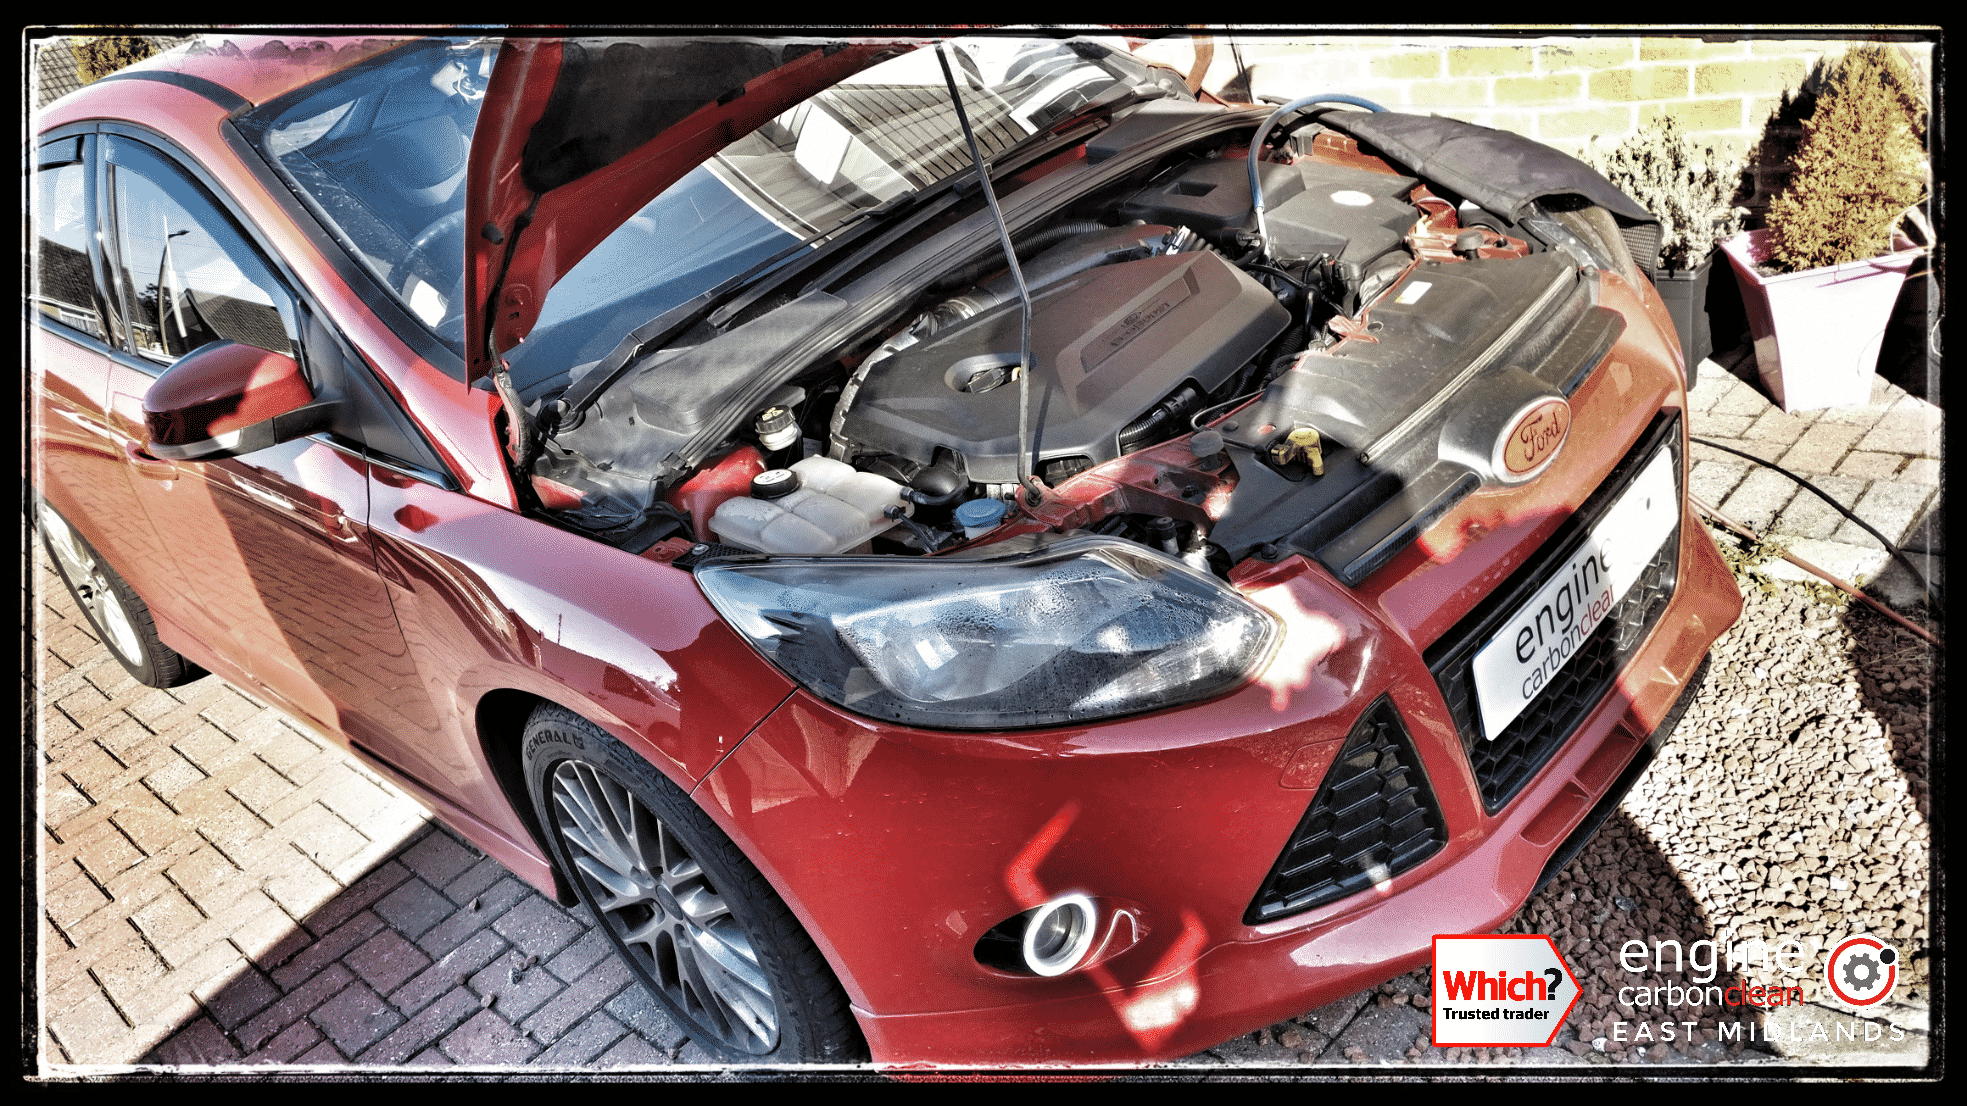 Engine Carbon Clean on a Ford Focus S 1.6 (2012 - 100,201 miles)